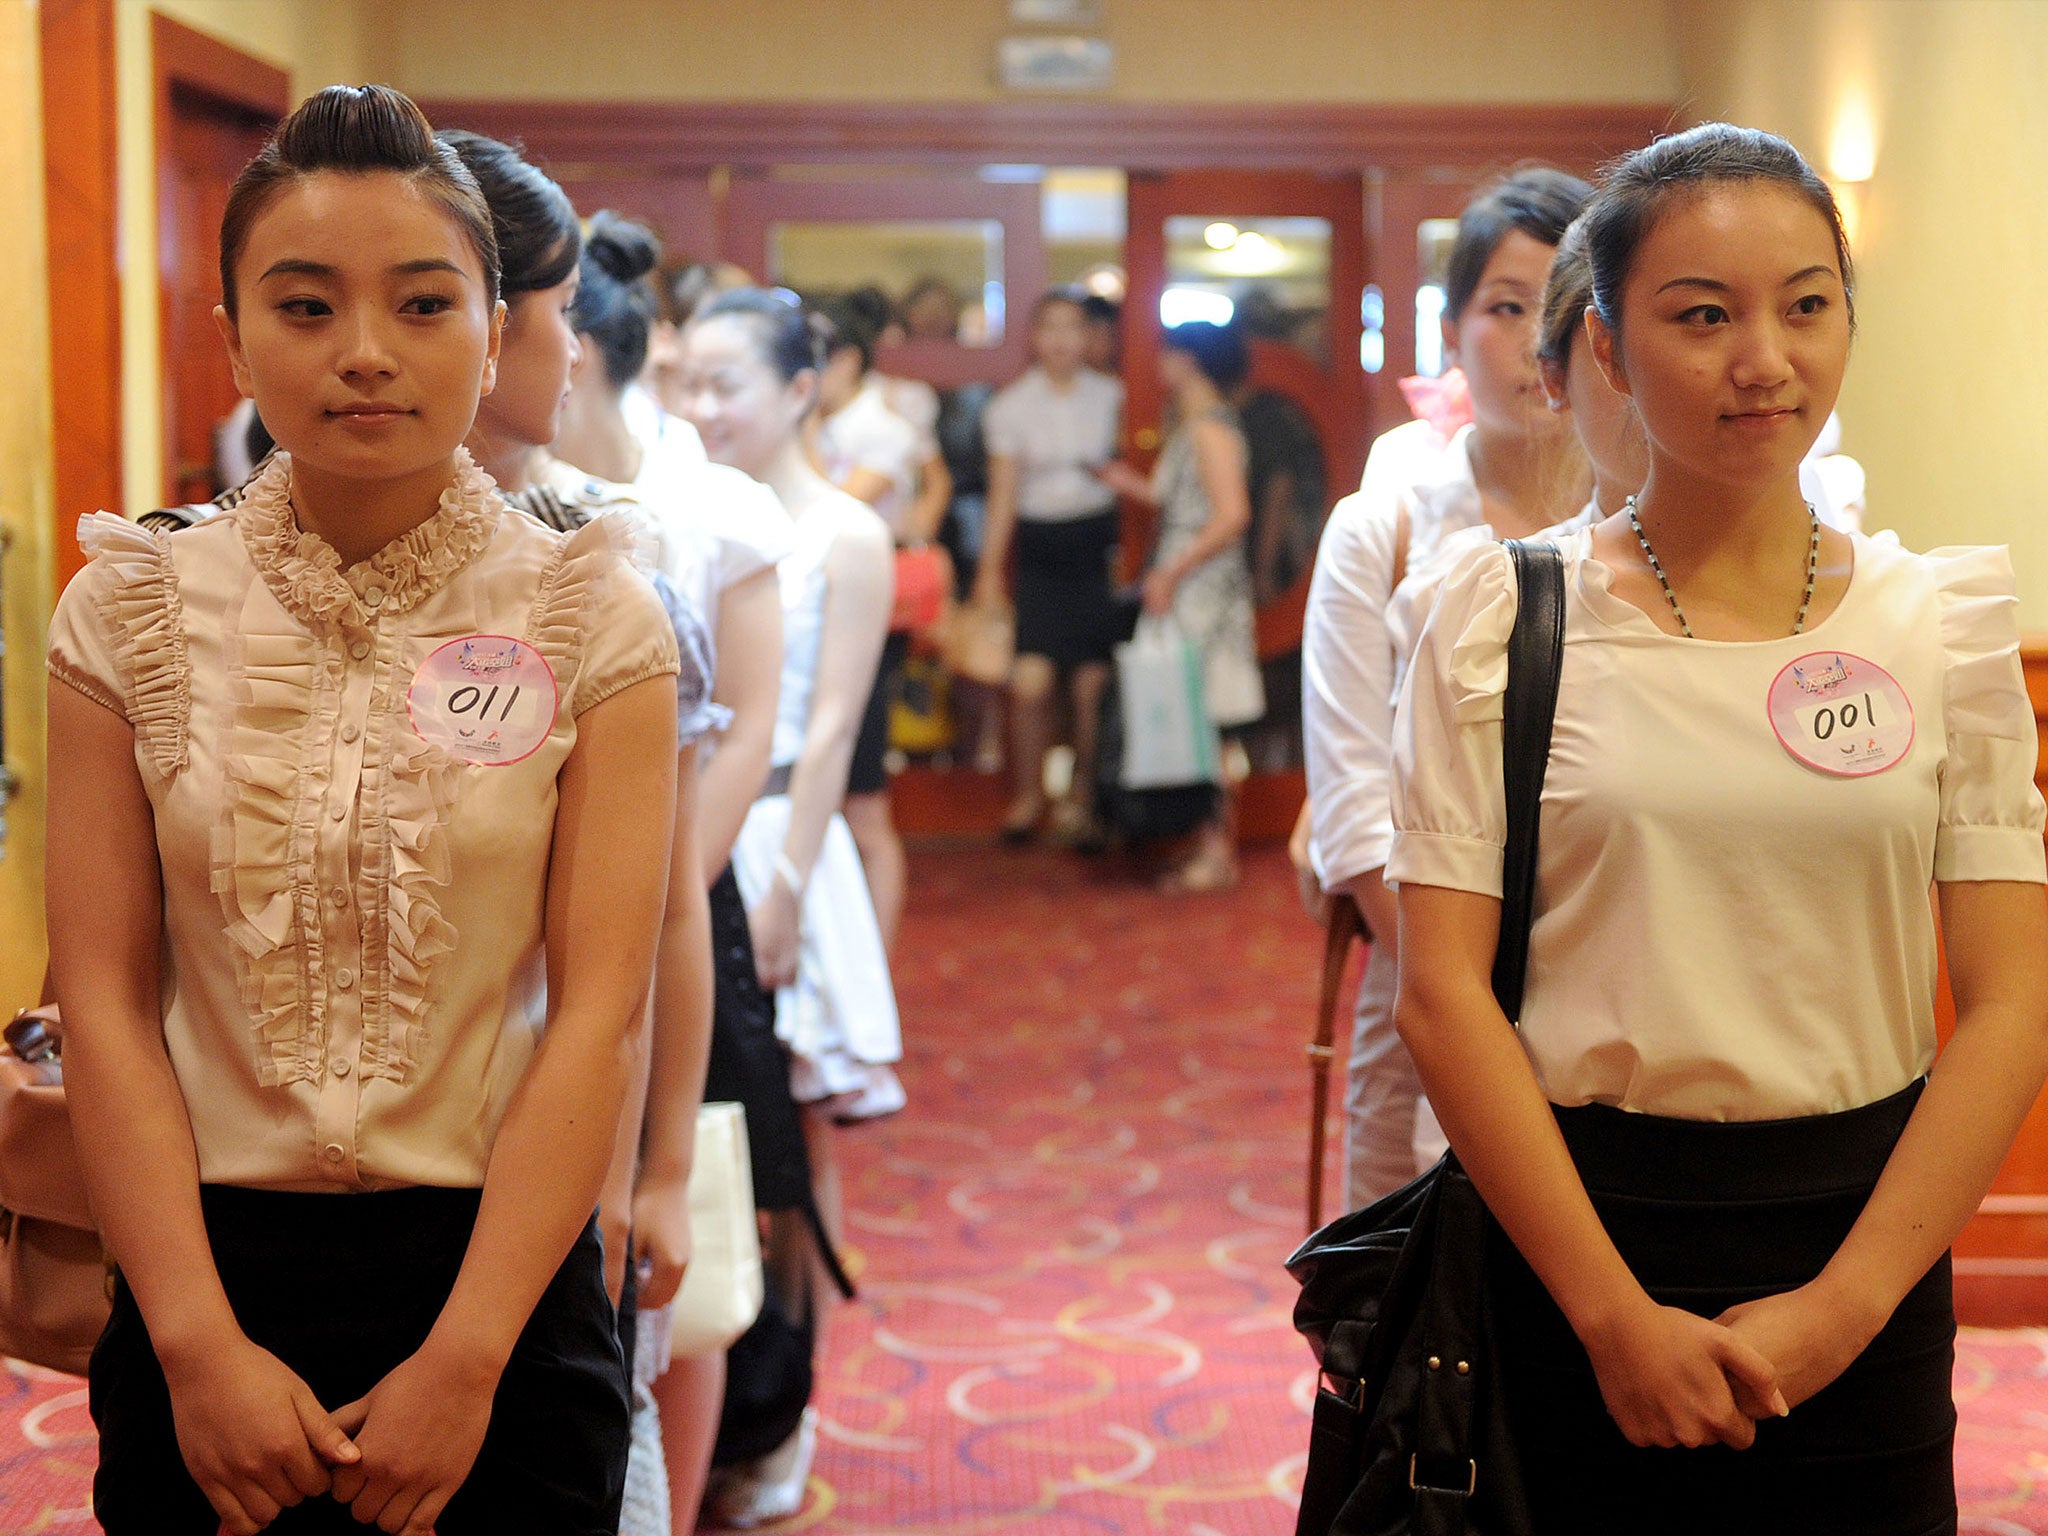 Chinese women queue to be interviewed as flight attendants